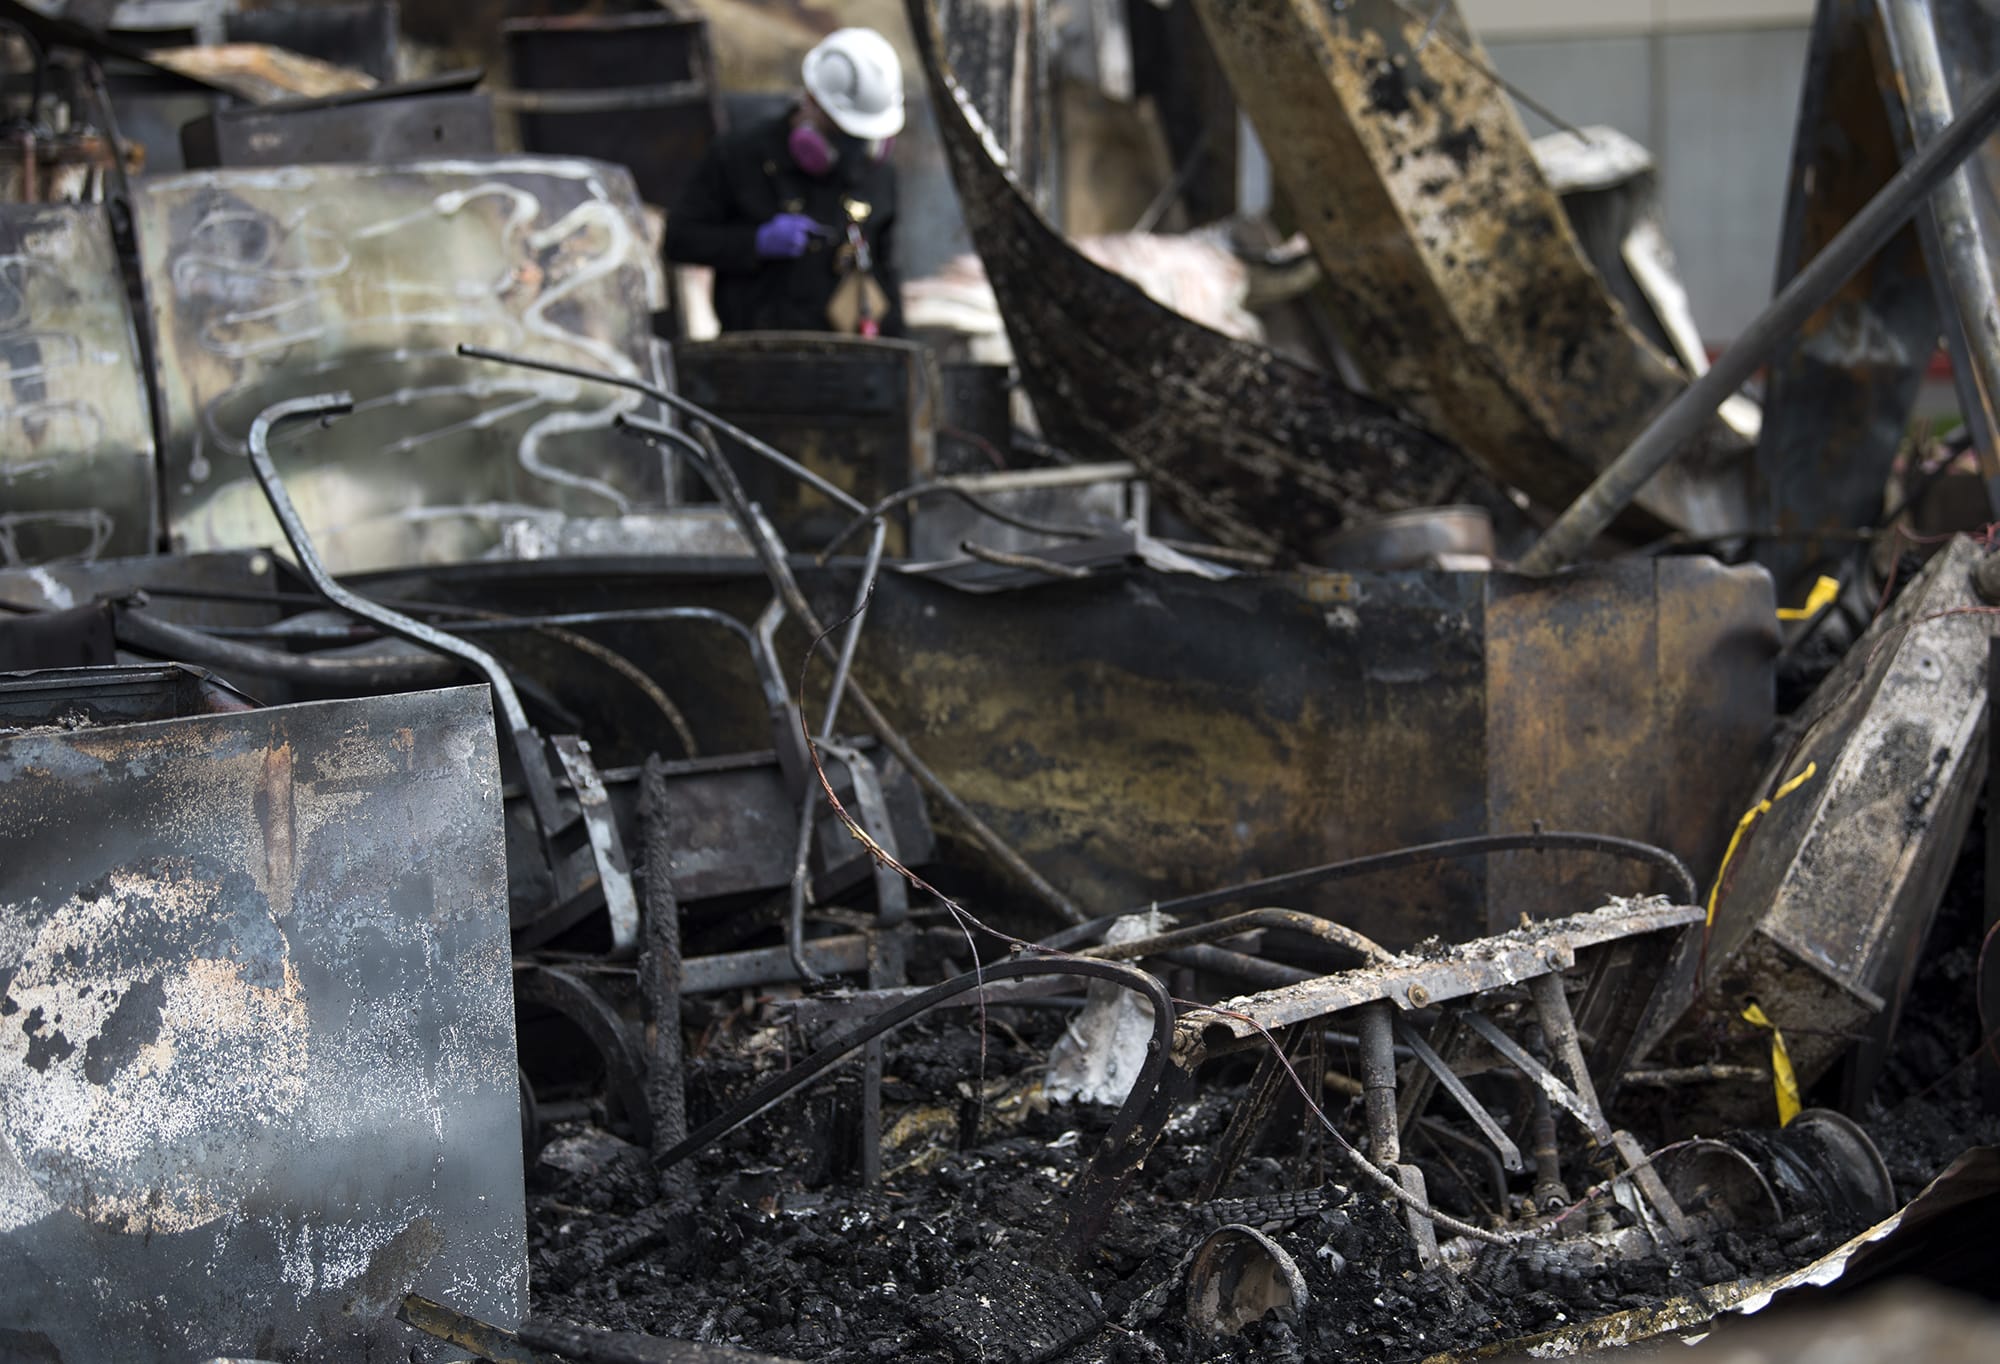 Clark County fire officials investigate the scene of a fire at the Malt Shop and Grill and the Chicken and Rib House booths at the Clark County Event Center at the Fairgrounds on Wednesday morning, April 11, 2018. Betty and Larry Bowman run the two booths, and the remnants of their golf cart is visible in the burnt structure.